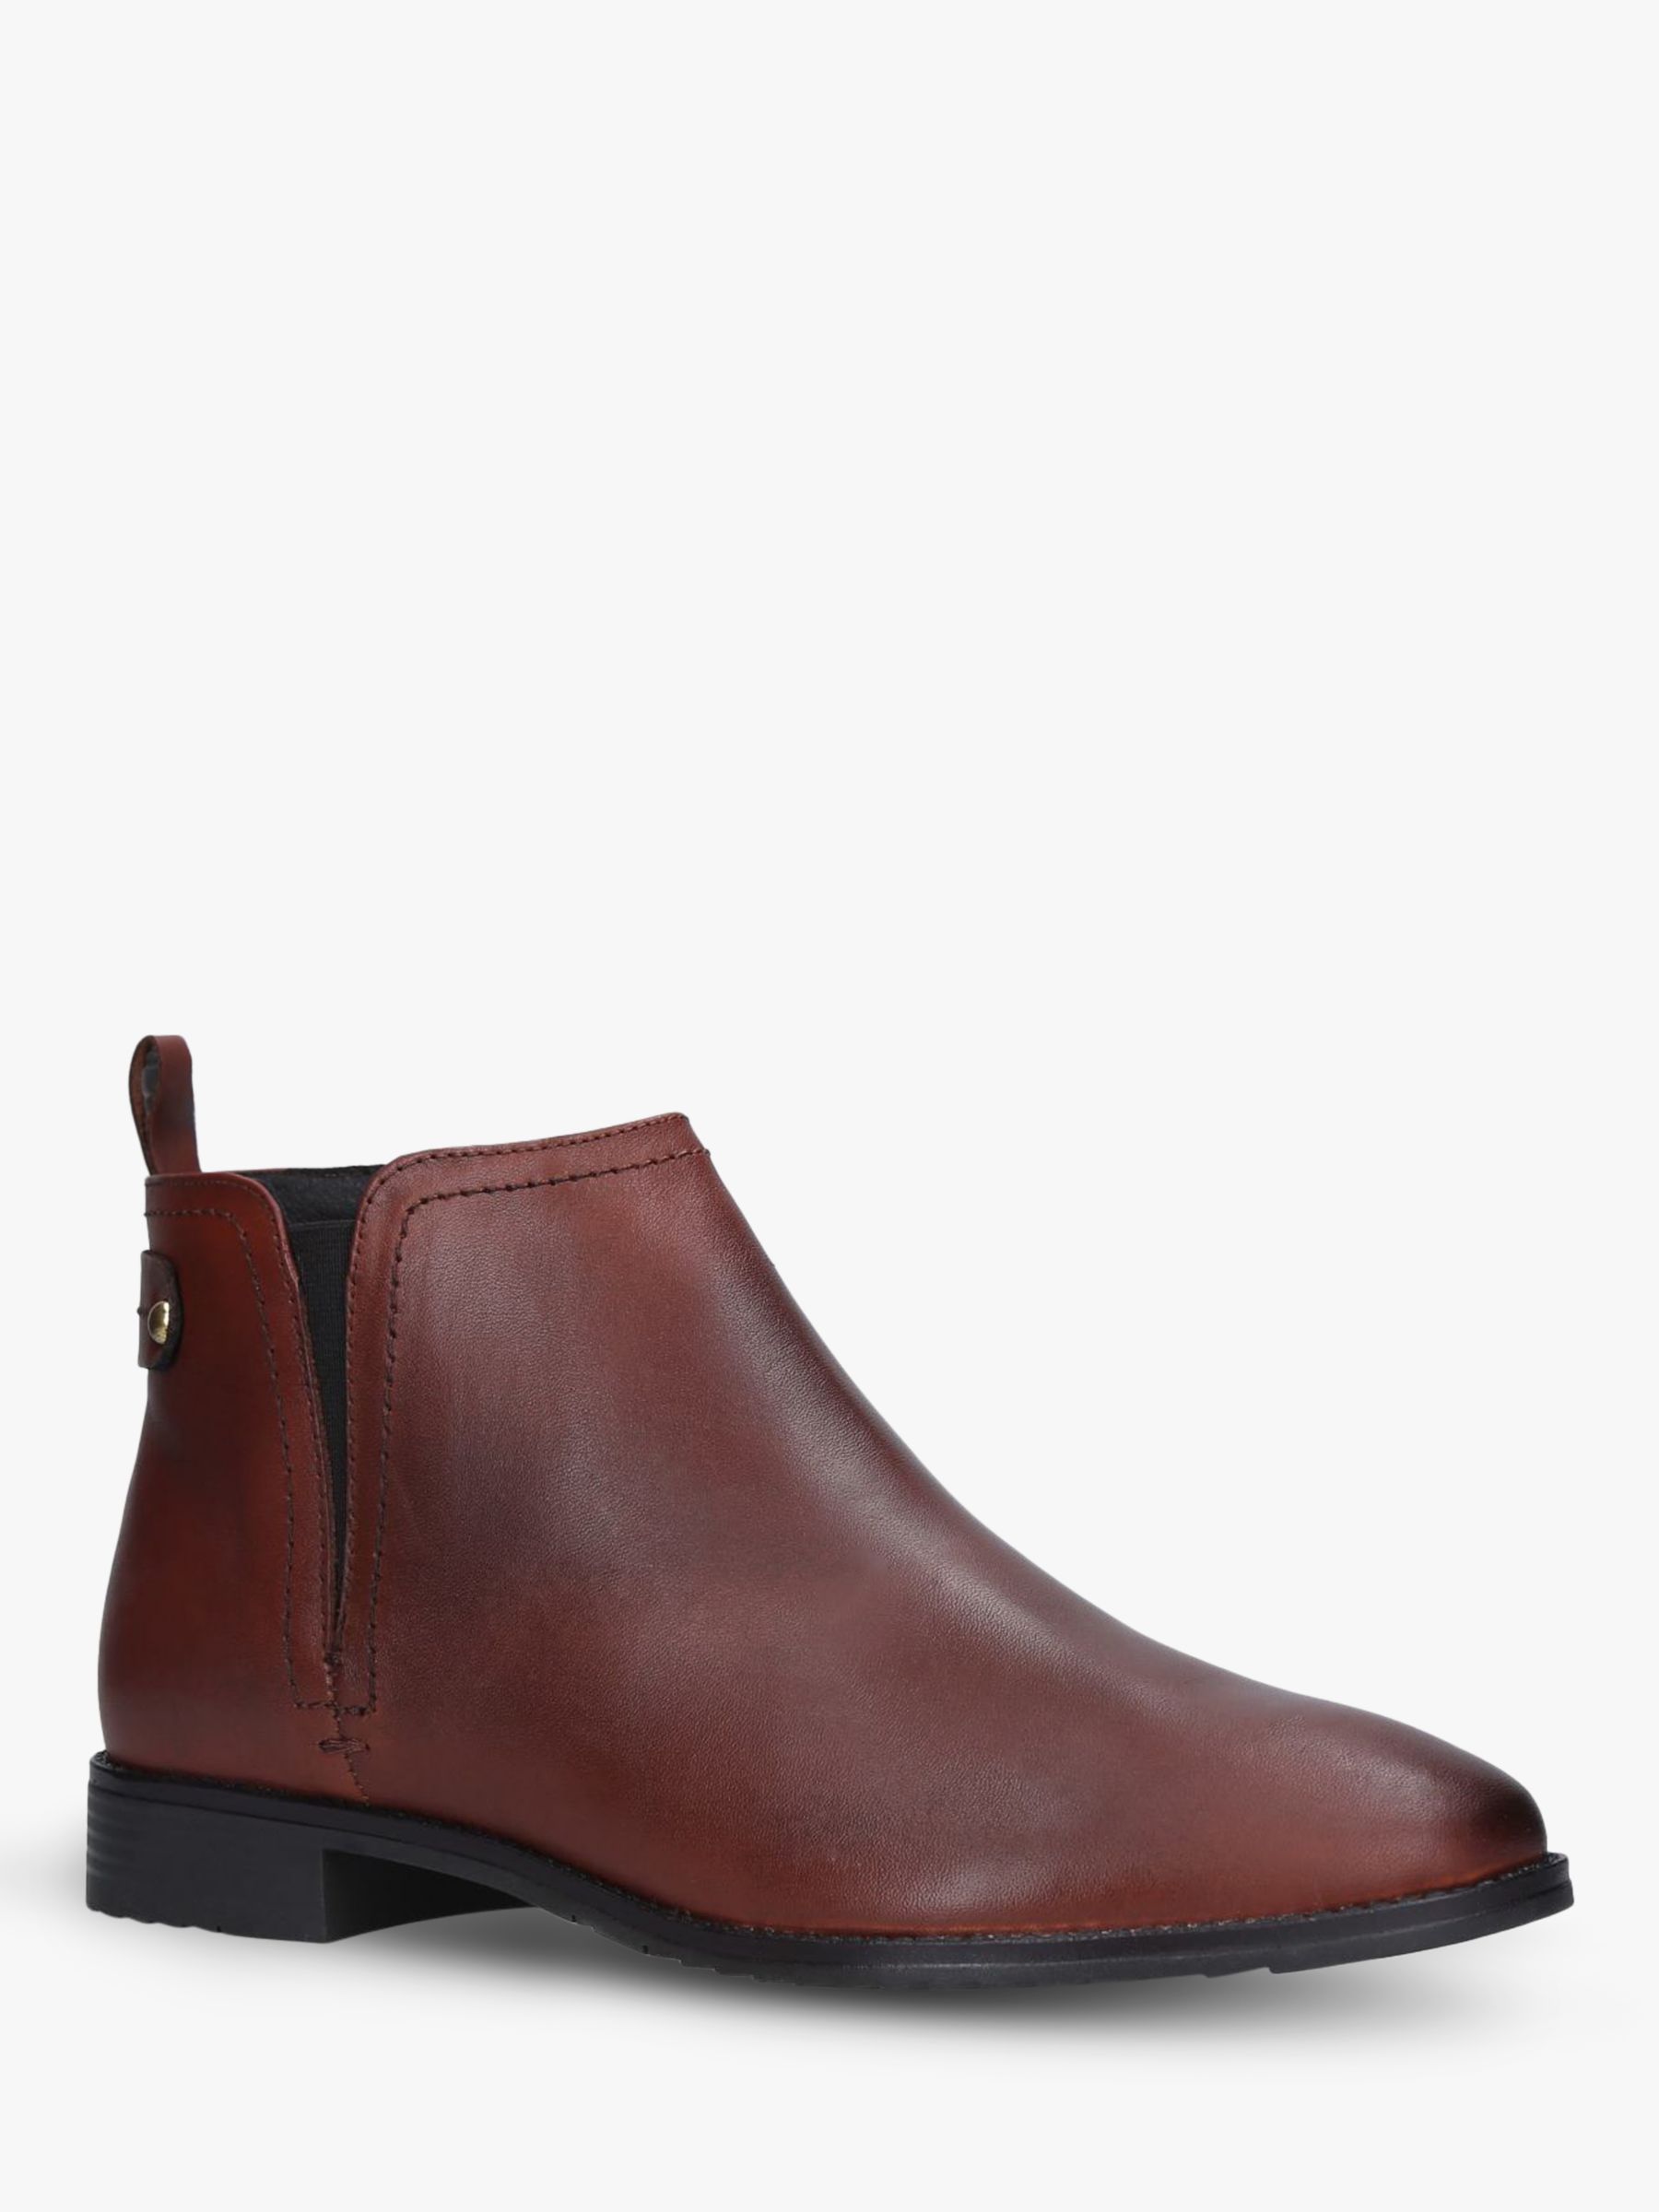 Carvela Comfort Rexx Leather Chelsea Boots, Brown Tan at John Lewis ...